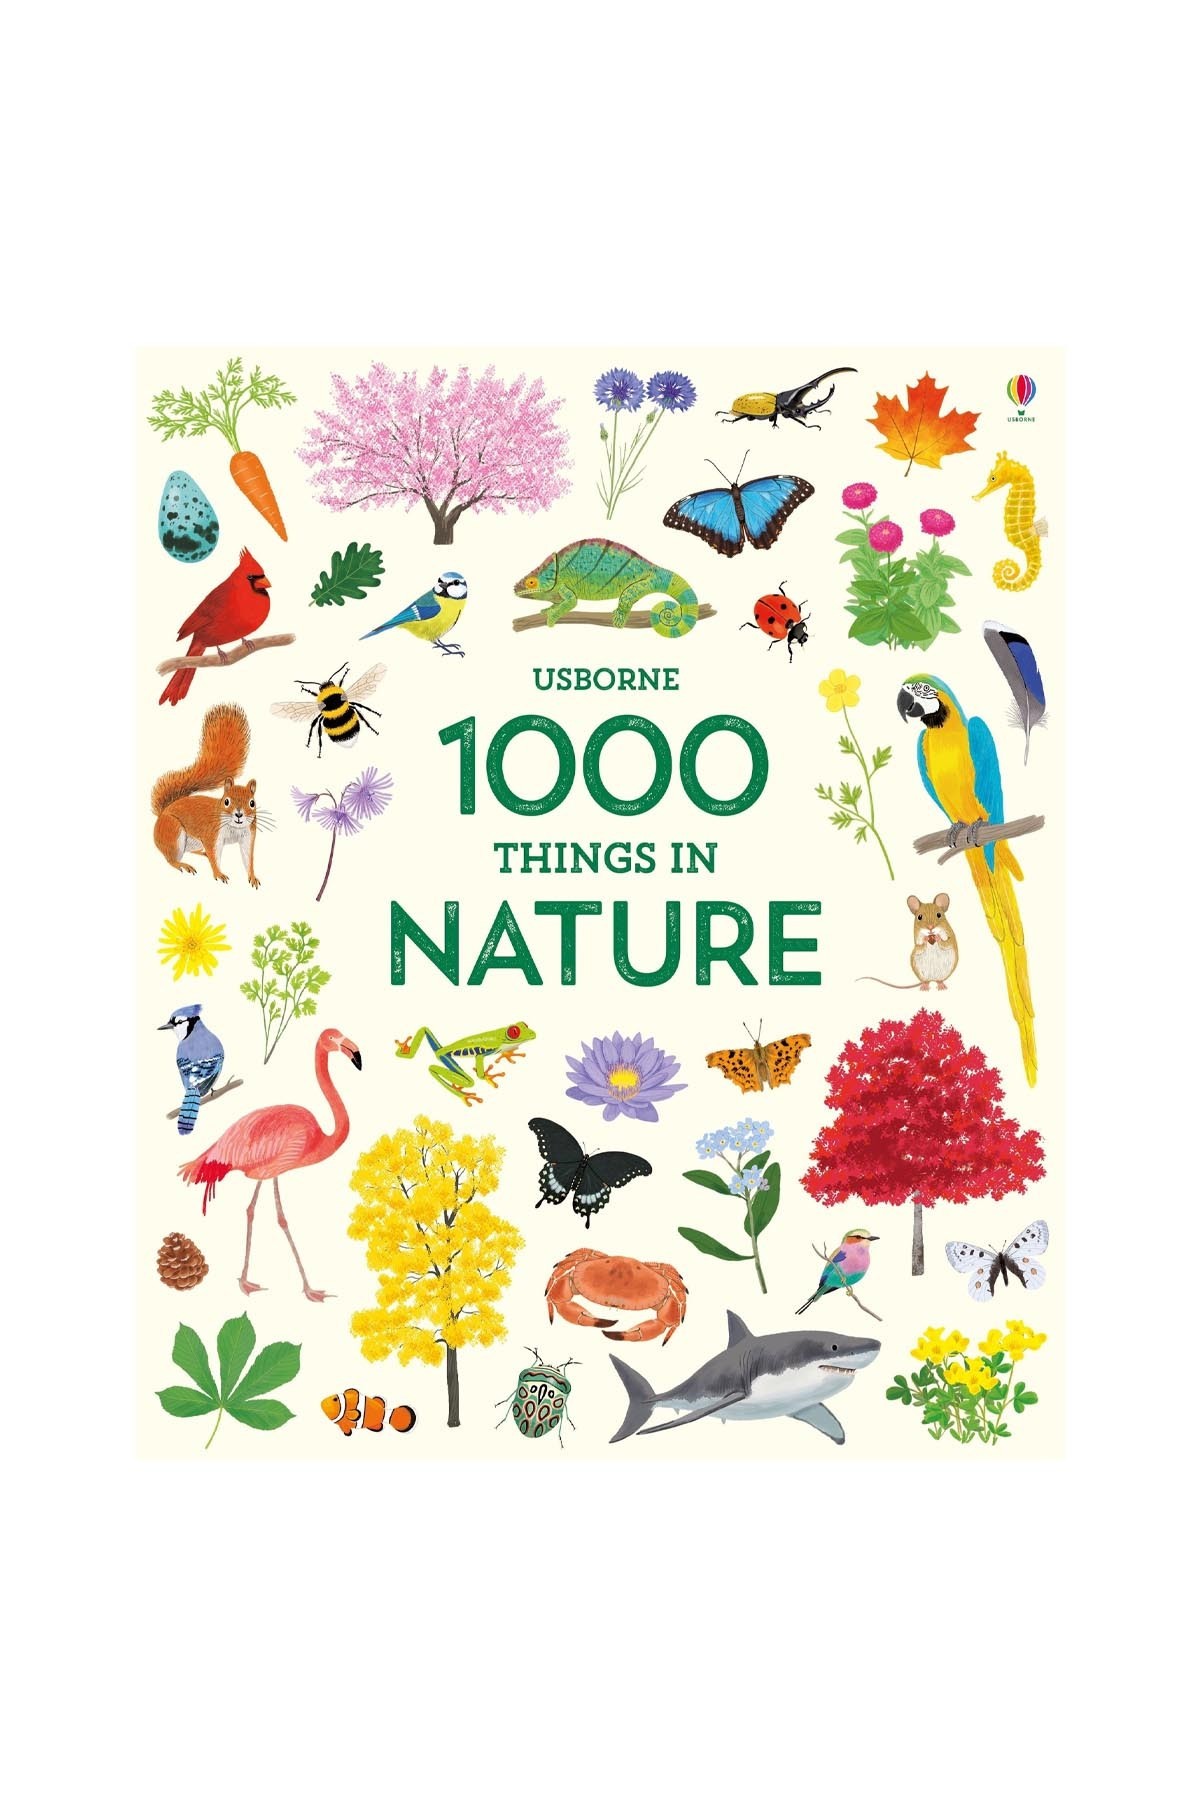 The Usborne 1000 Things In Nature